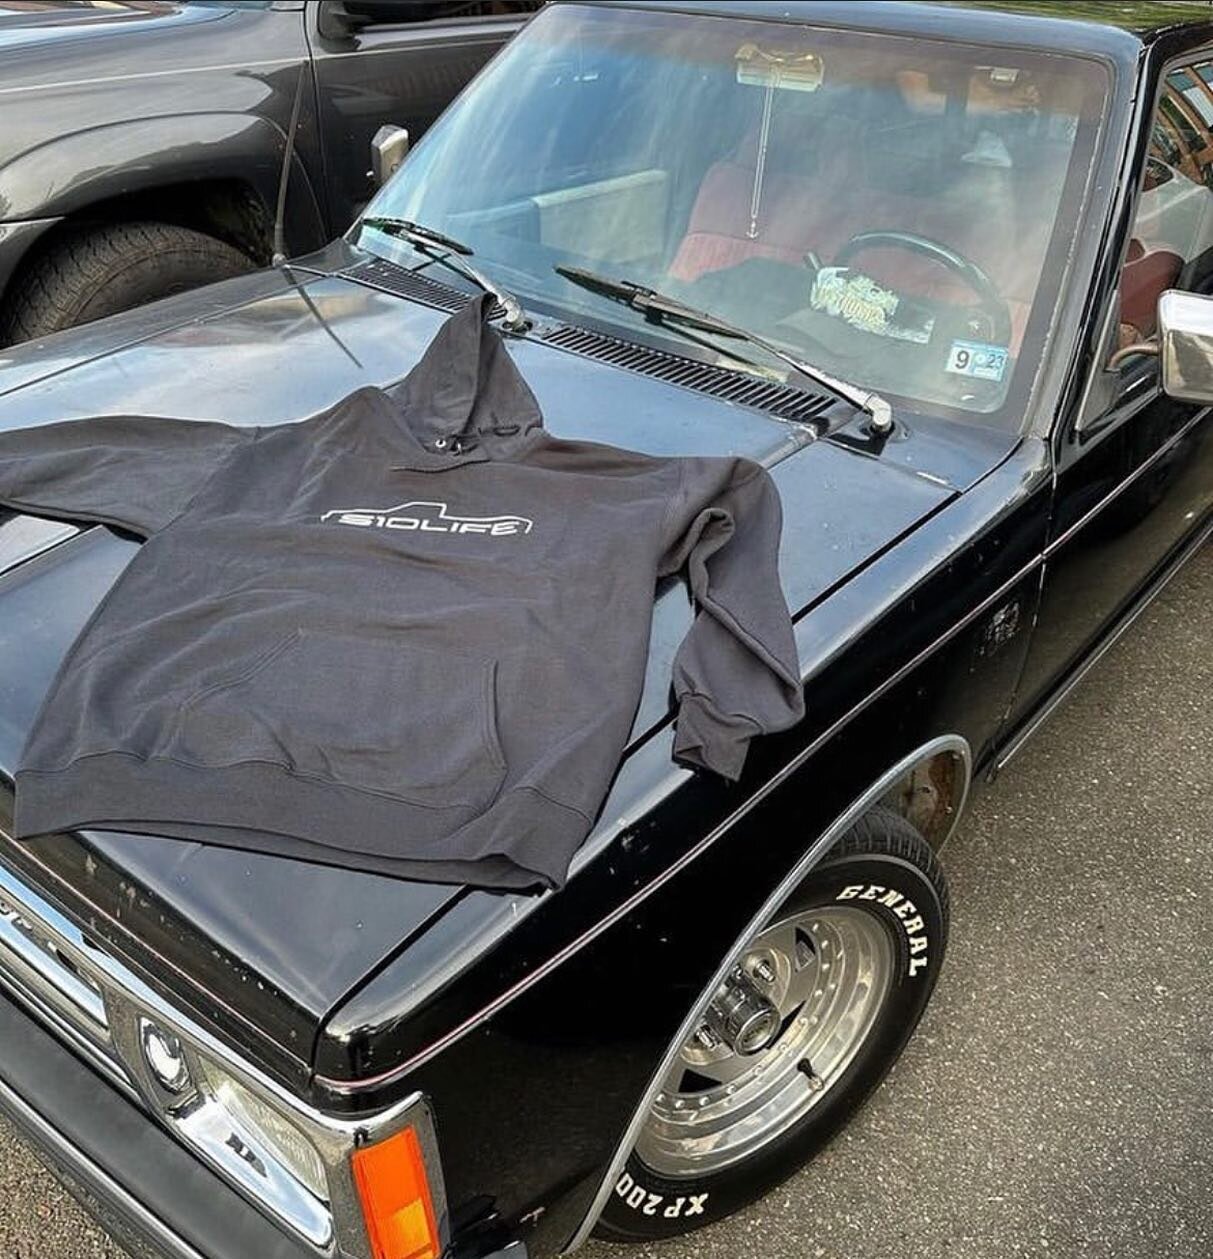 With the cold weather finally here make sure to keep yourself warm with one of our Truck Logo Hoodies 😉

Visit us at S10LIFE.ORG all support is greatly appreciated !
#S10LIFE
______________________________

#s10 #squarebody #gmc #chevy #chevorlet #d